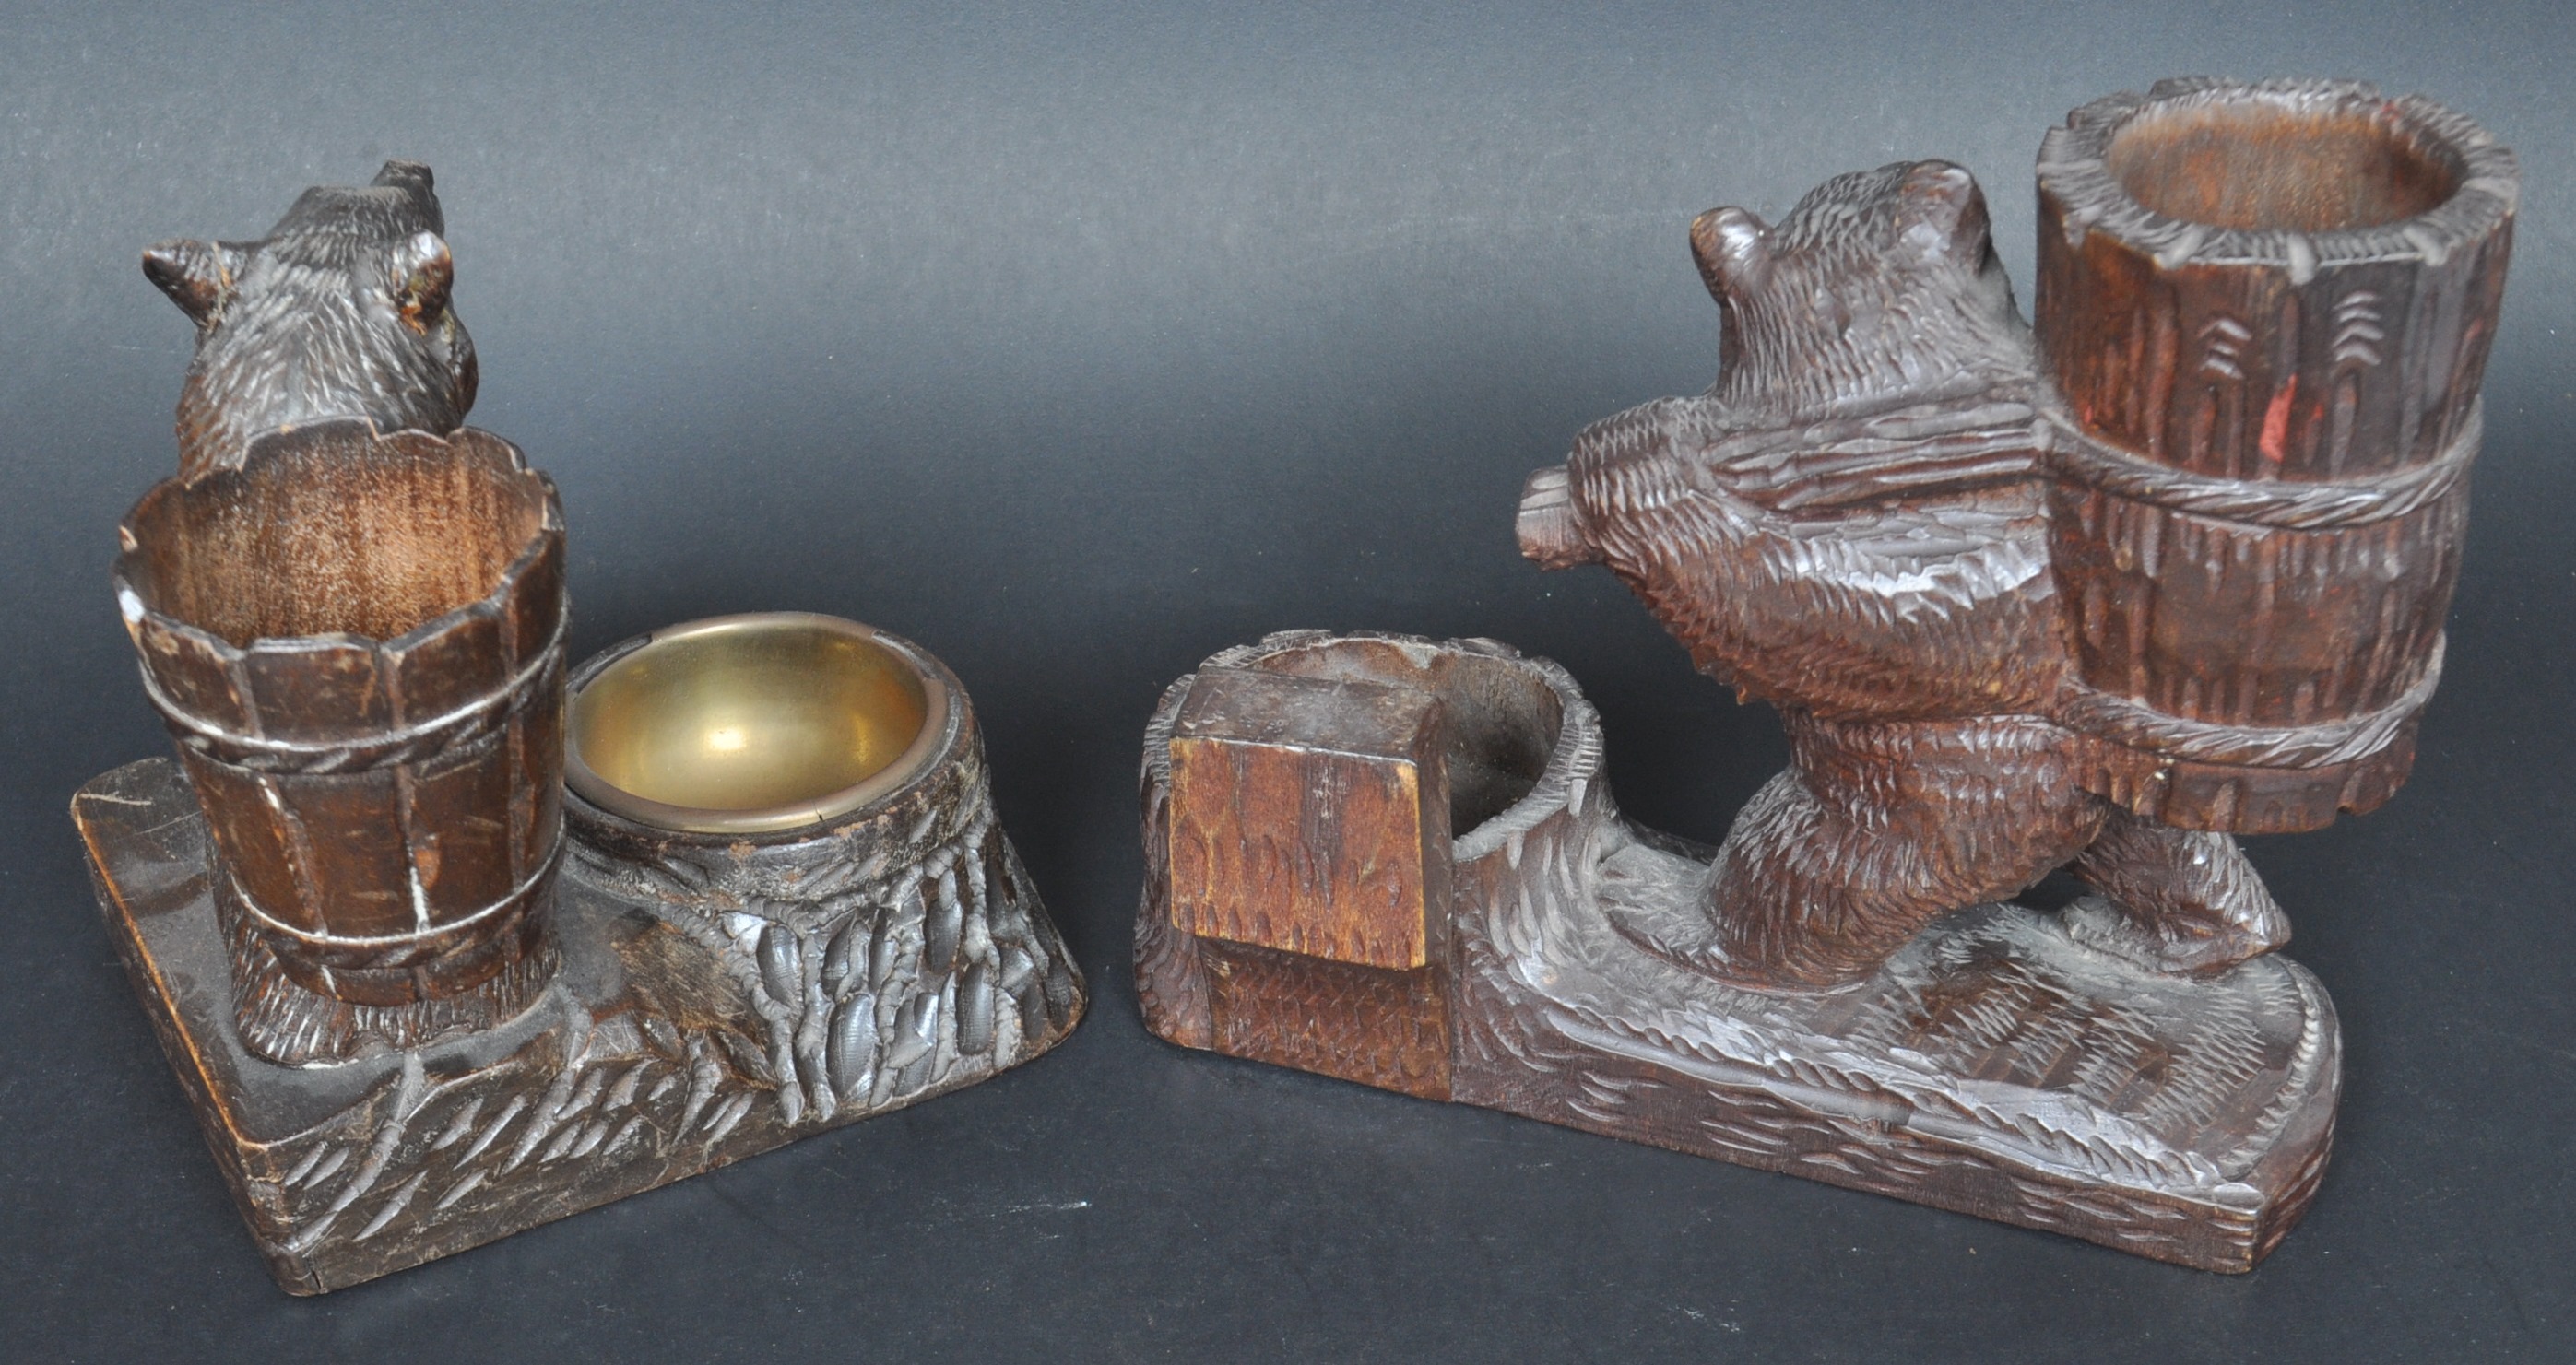 TWO 19TH CENTURY GERMAN CARVED BEAR MATCHBOX HOLDERS - Image 5 of 5